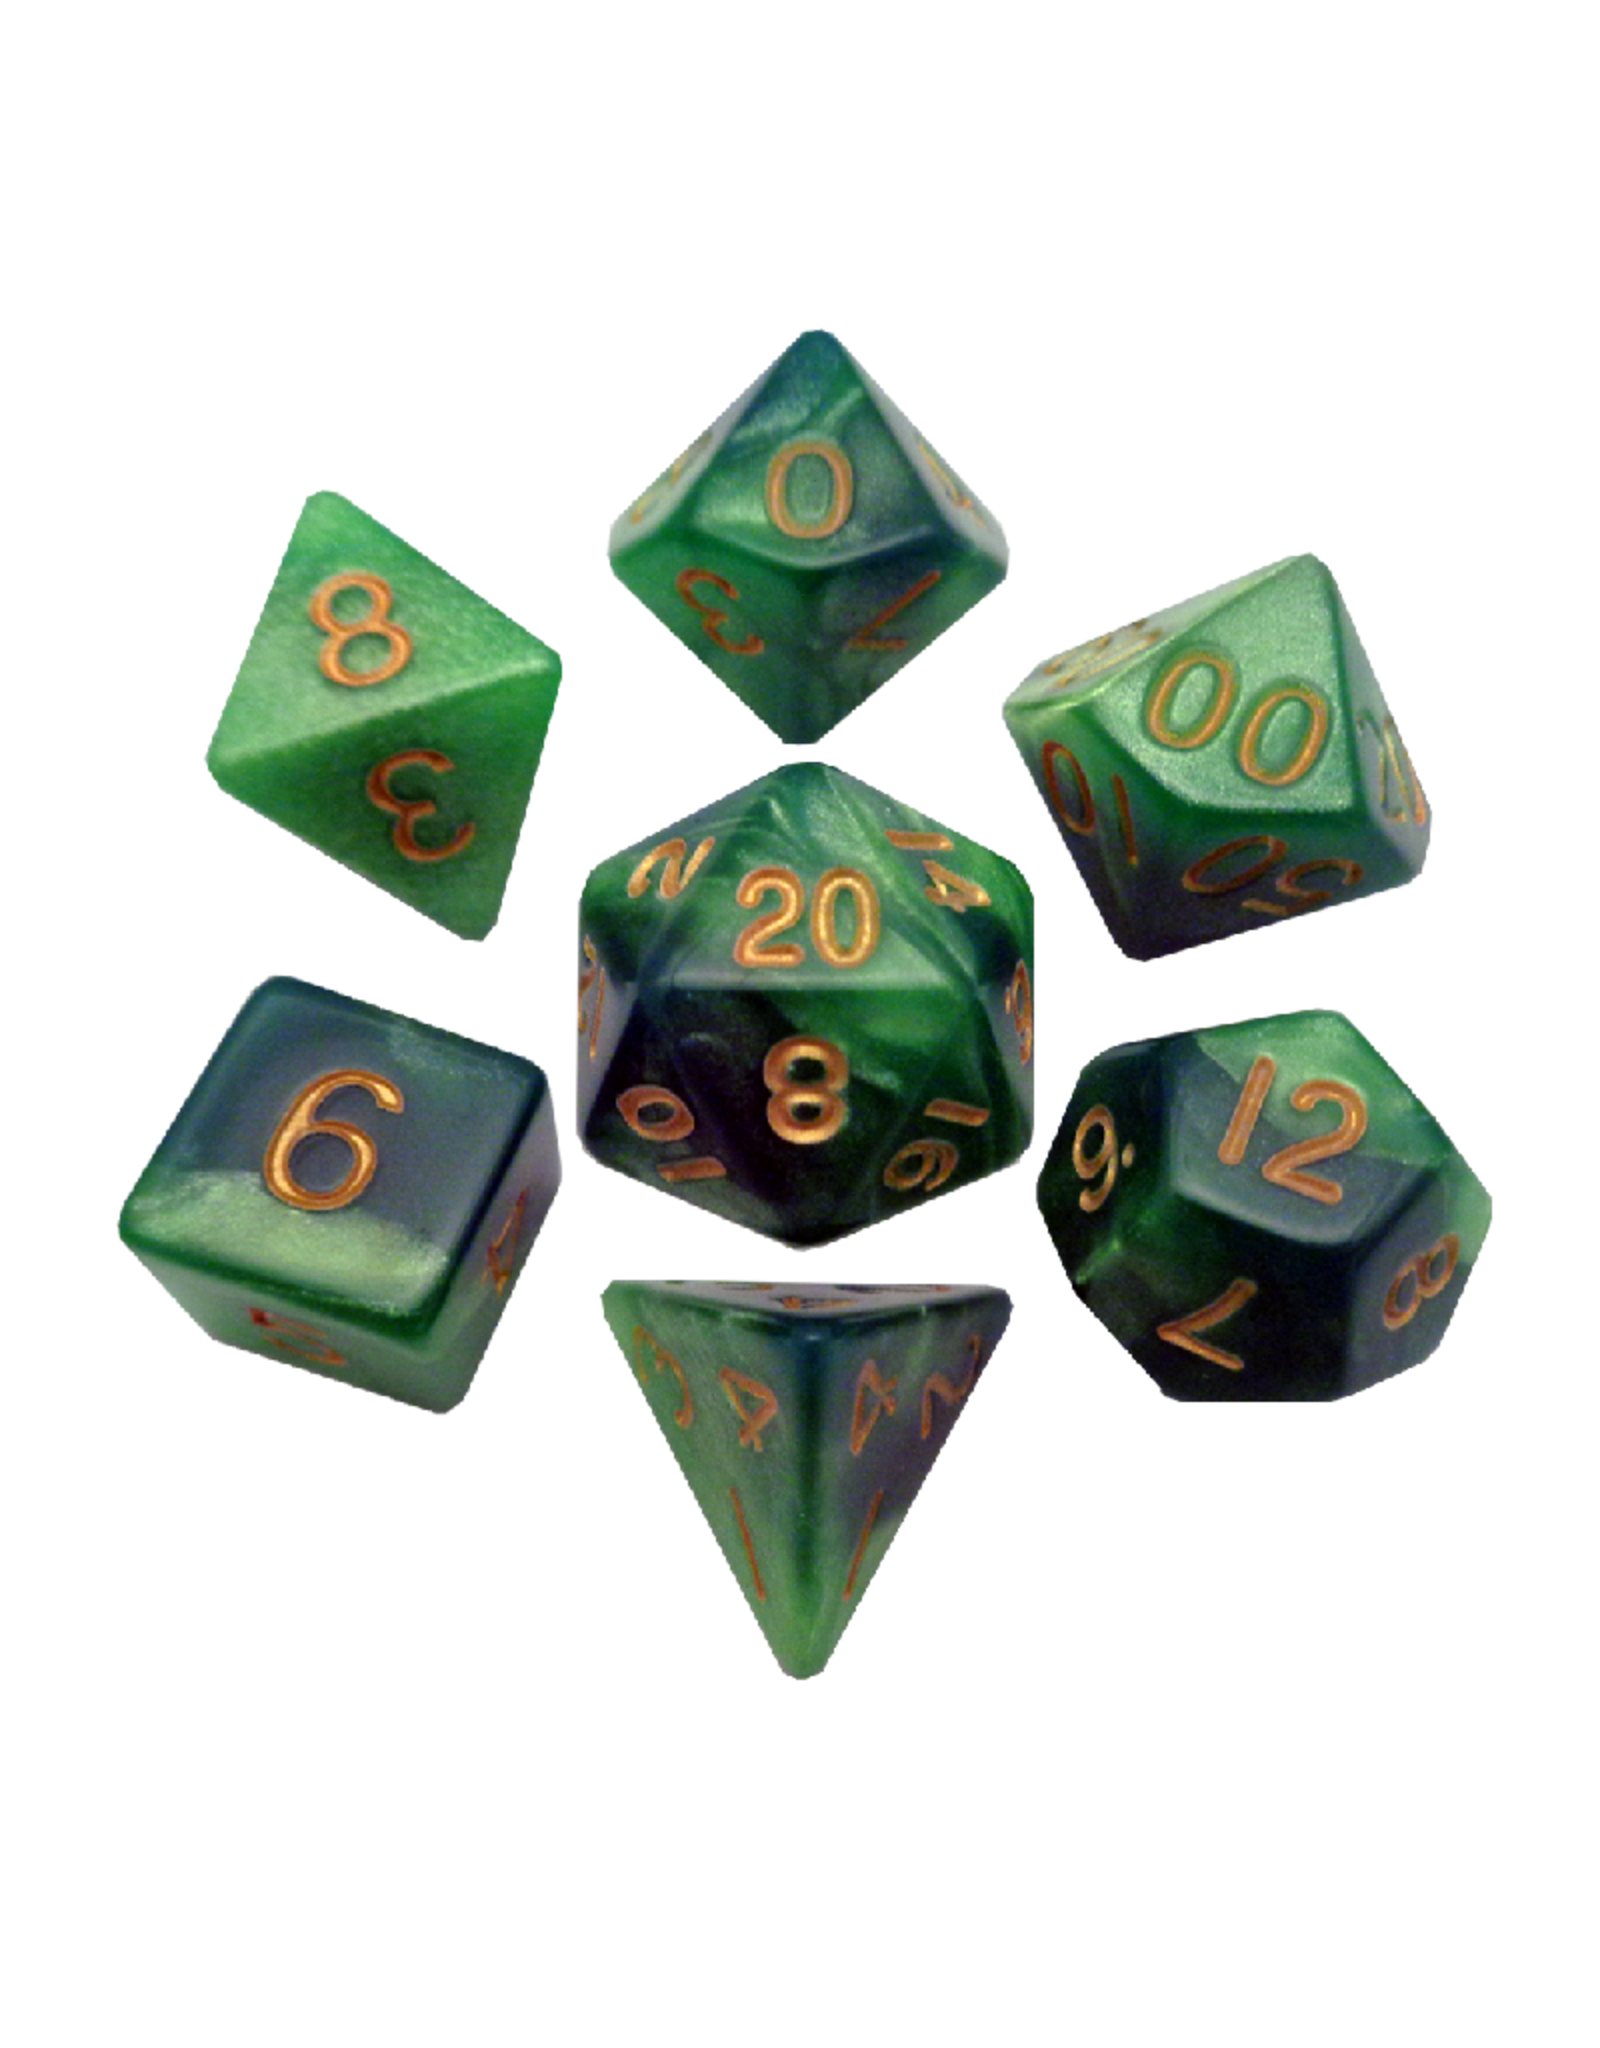 Polyhedral Dice Set: Combo - Green and Light Green w/Gold